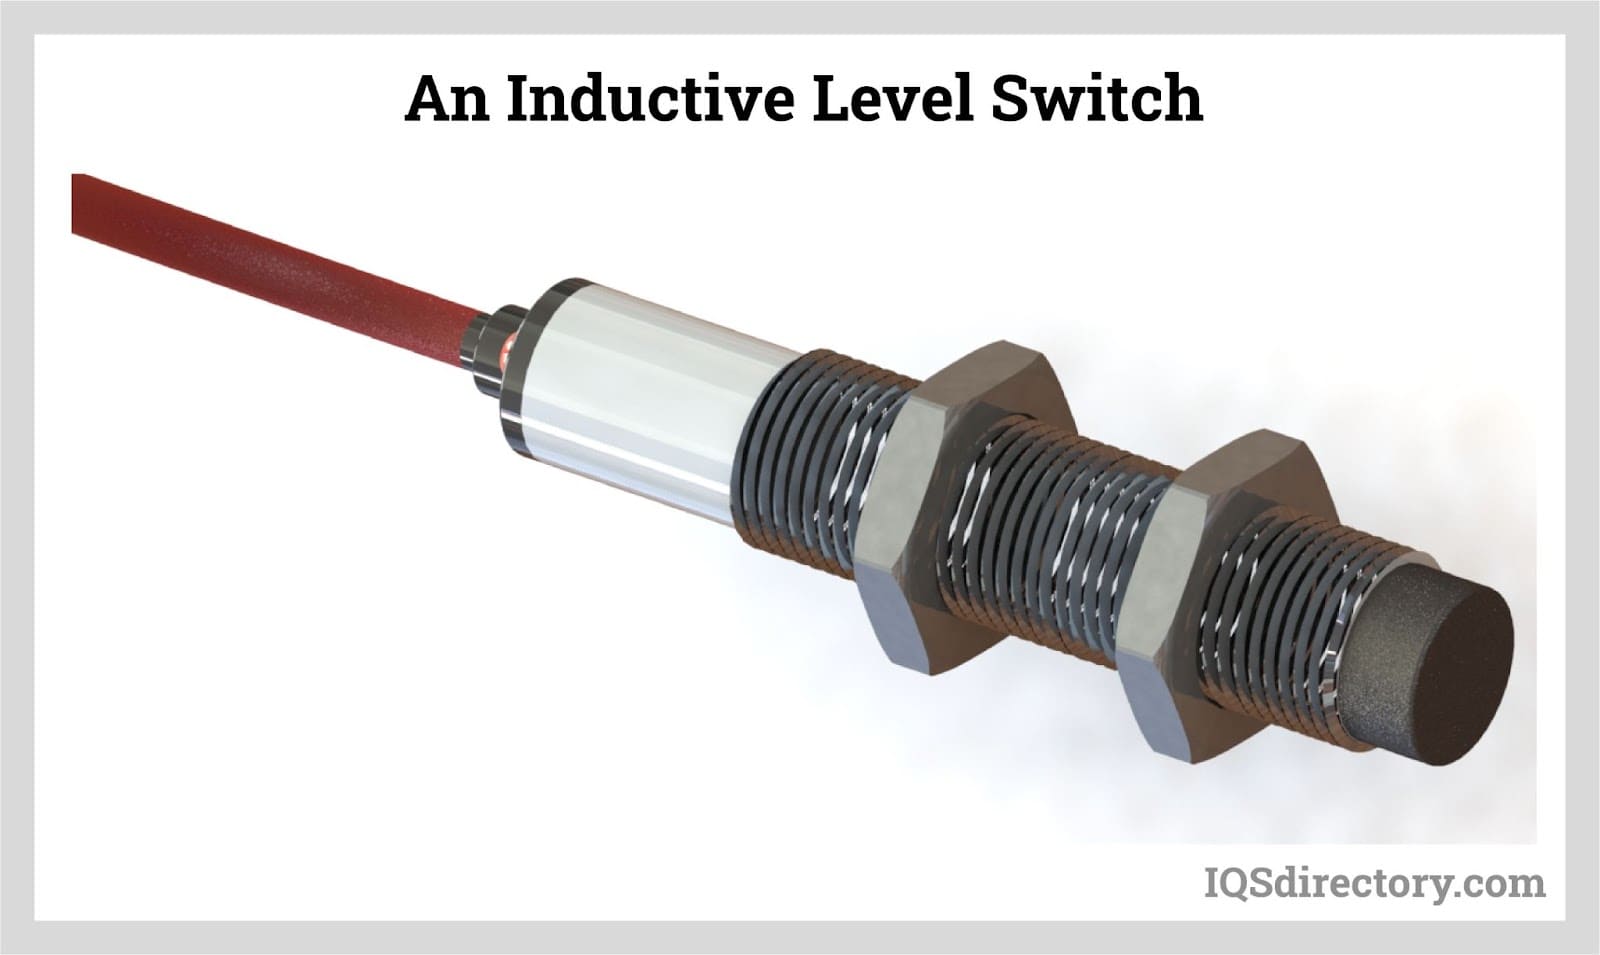 A Thermal Level Switch